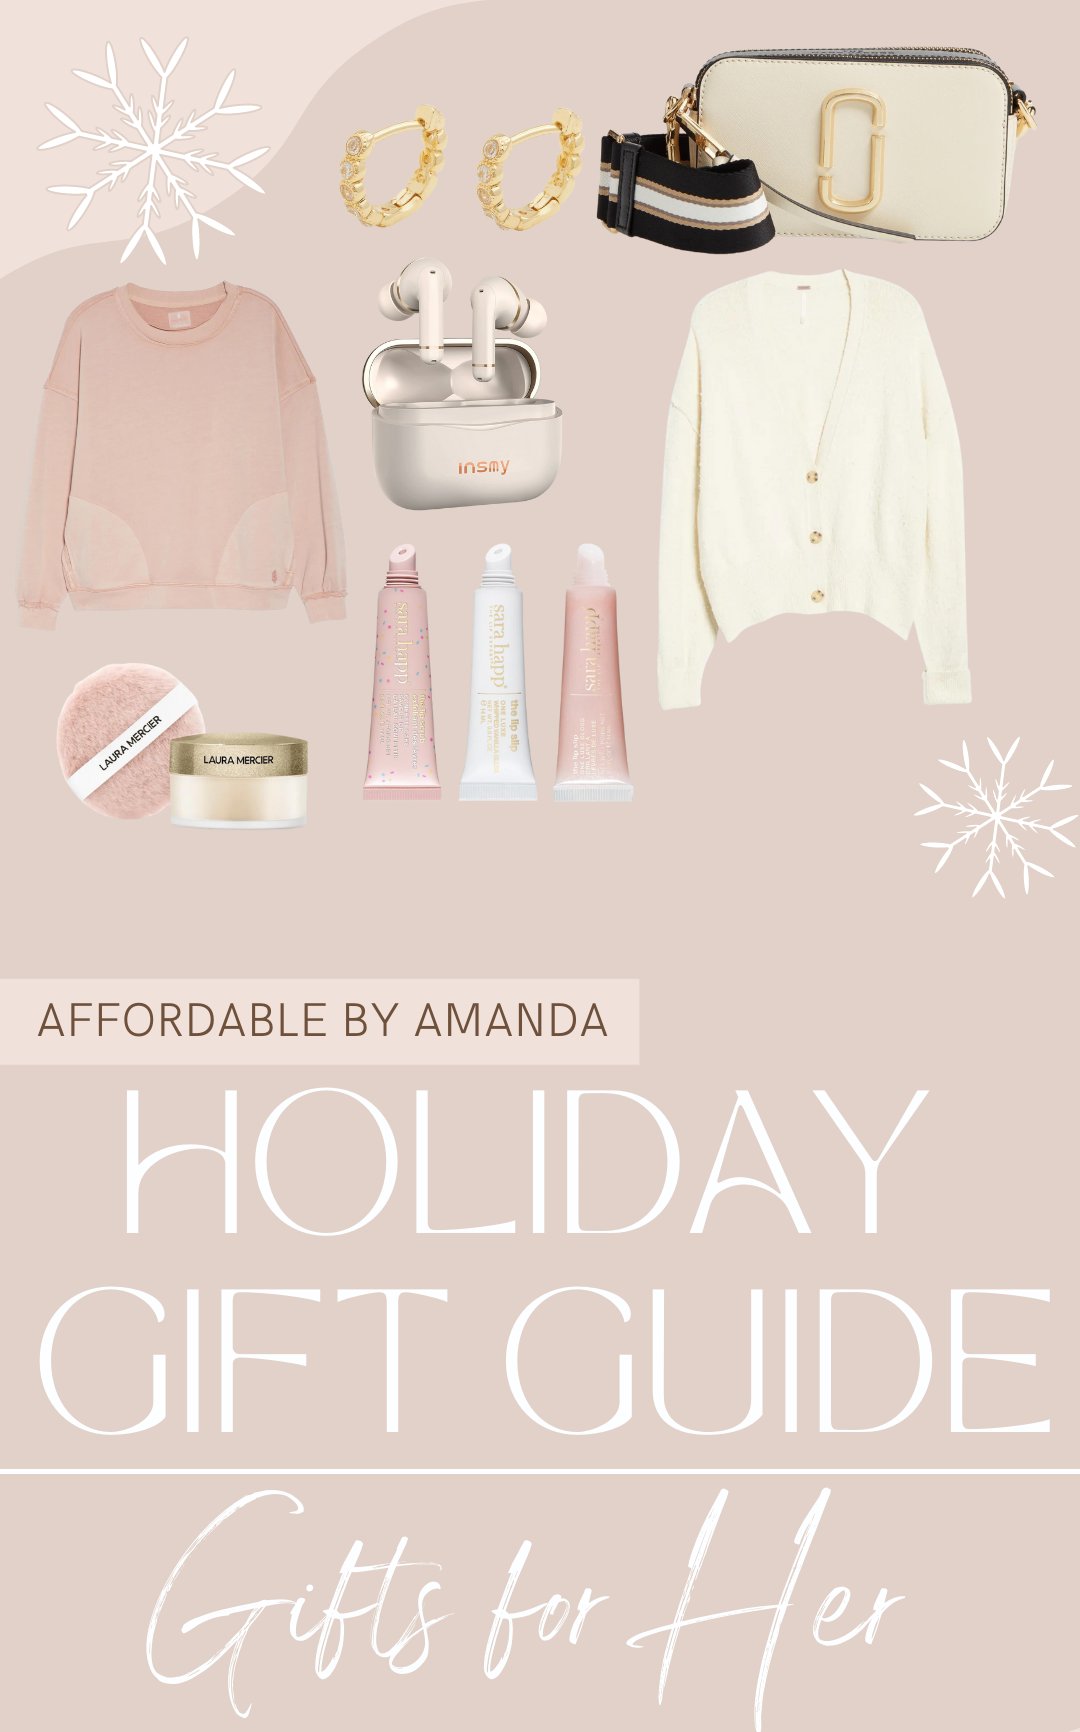 Holiday Gift Guide: Gifts for Her | Affordable by Amanda | Holiday Gift Ideas 2021